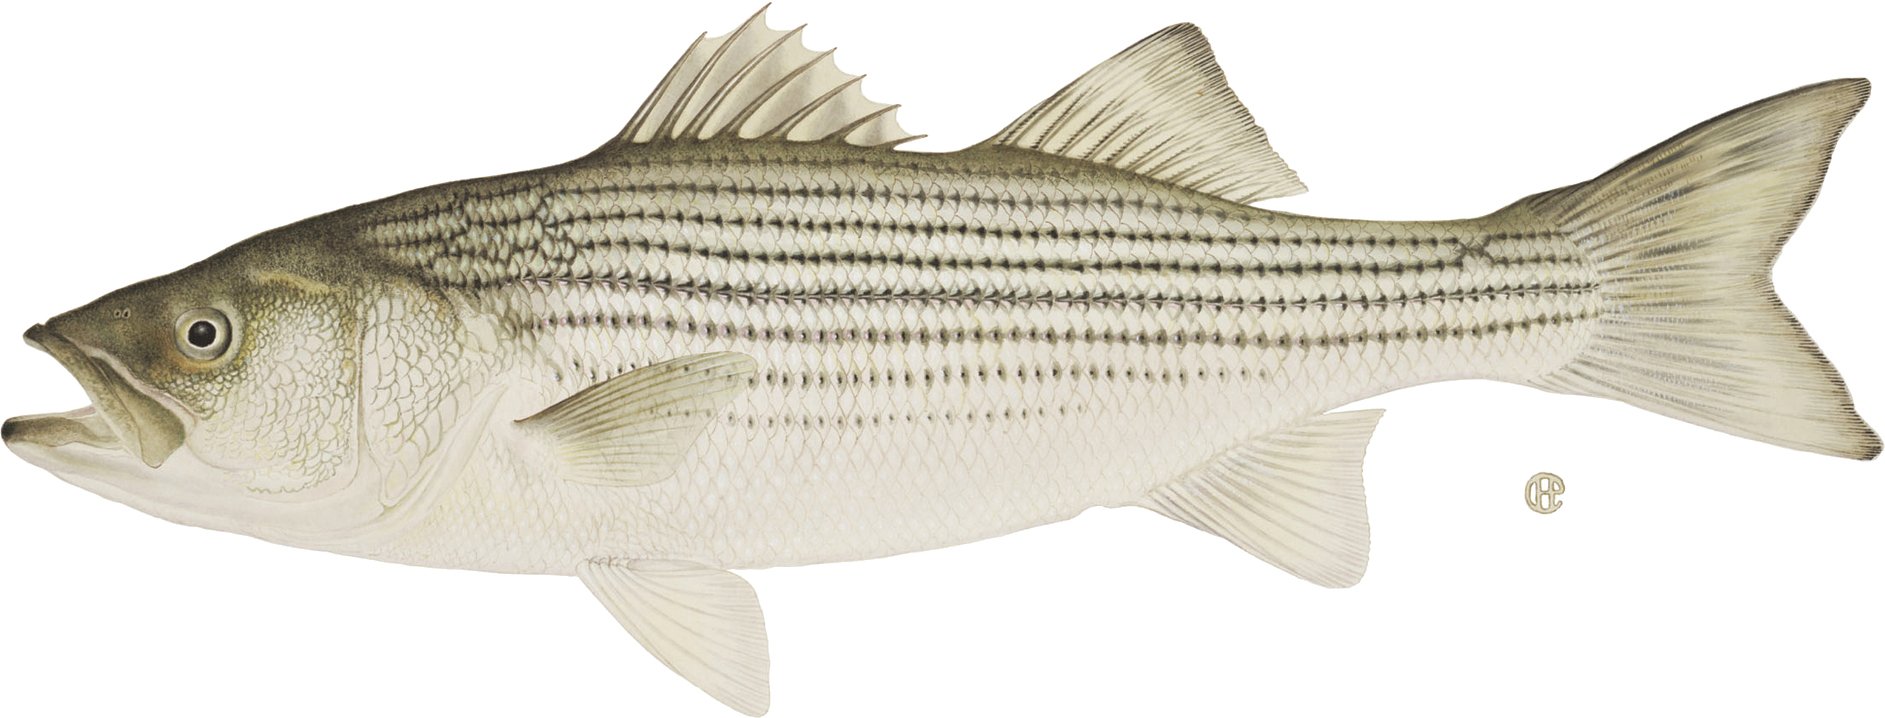 Hudson River striped bass fishing – What you need to know 